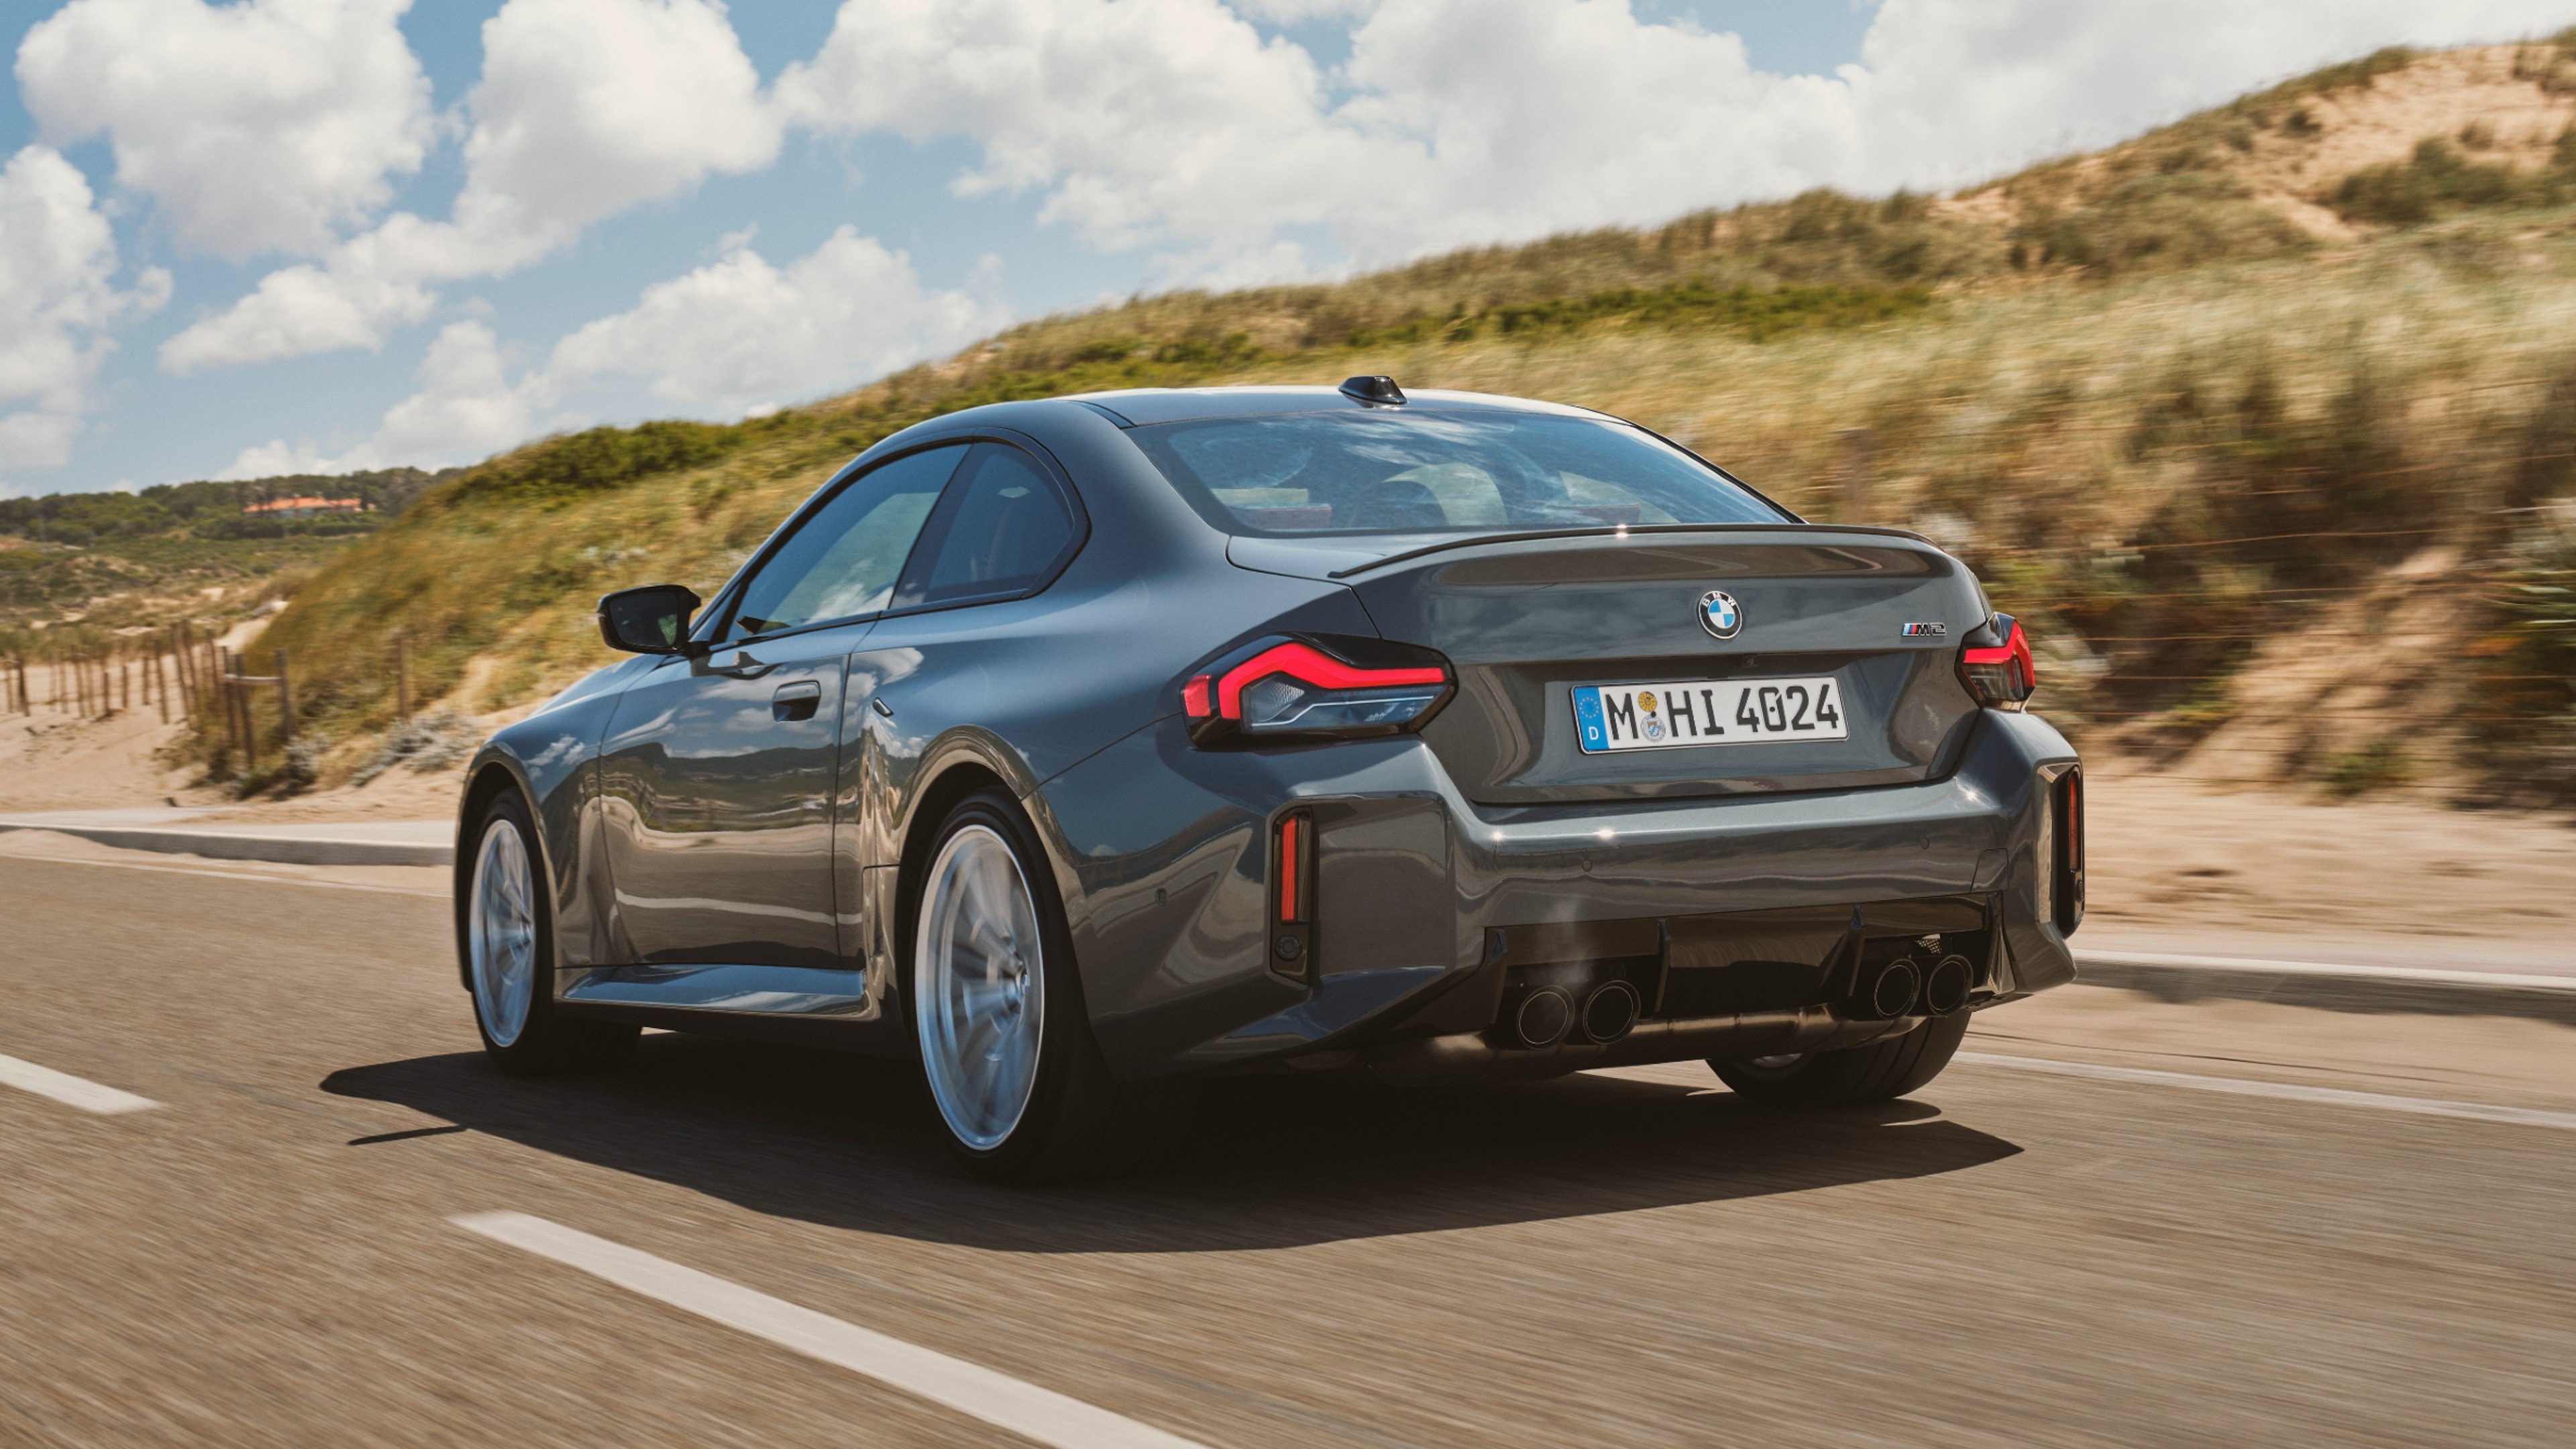 The 2024 BMW M2 packs more power from its 3.0-litre six-cylinder twin-turbo motor and is now closer to the M3 and M4 